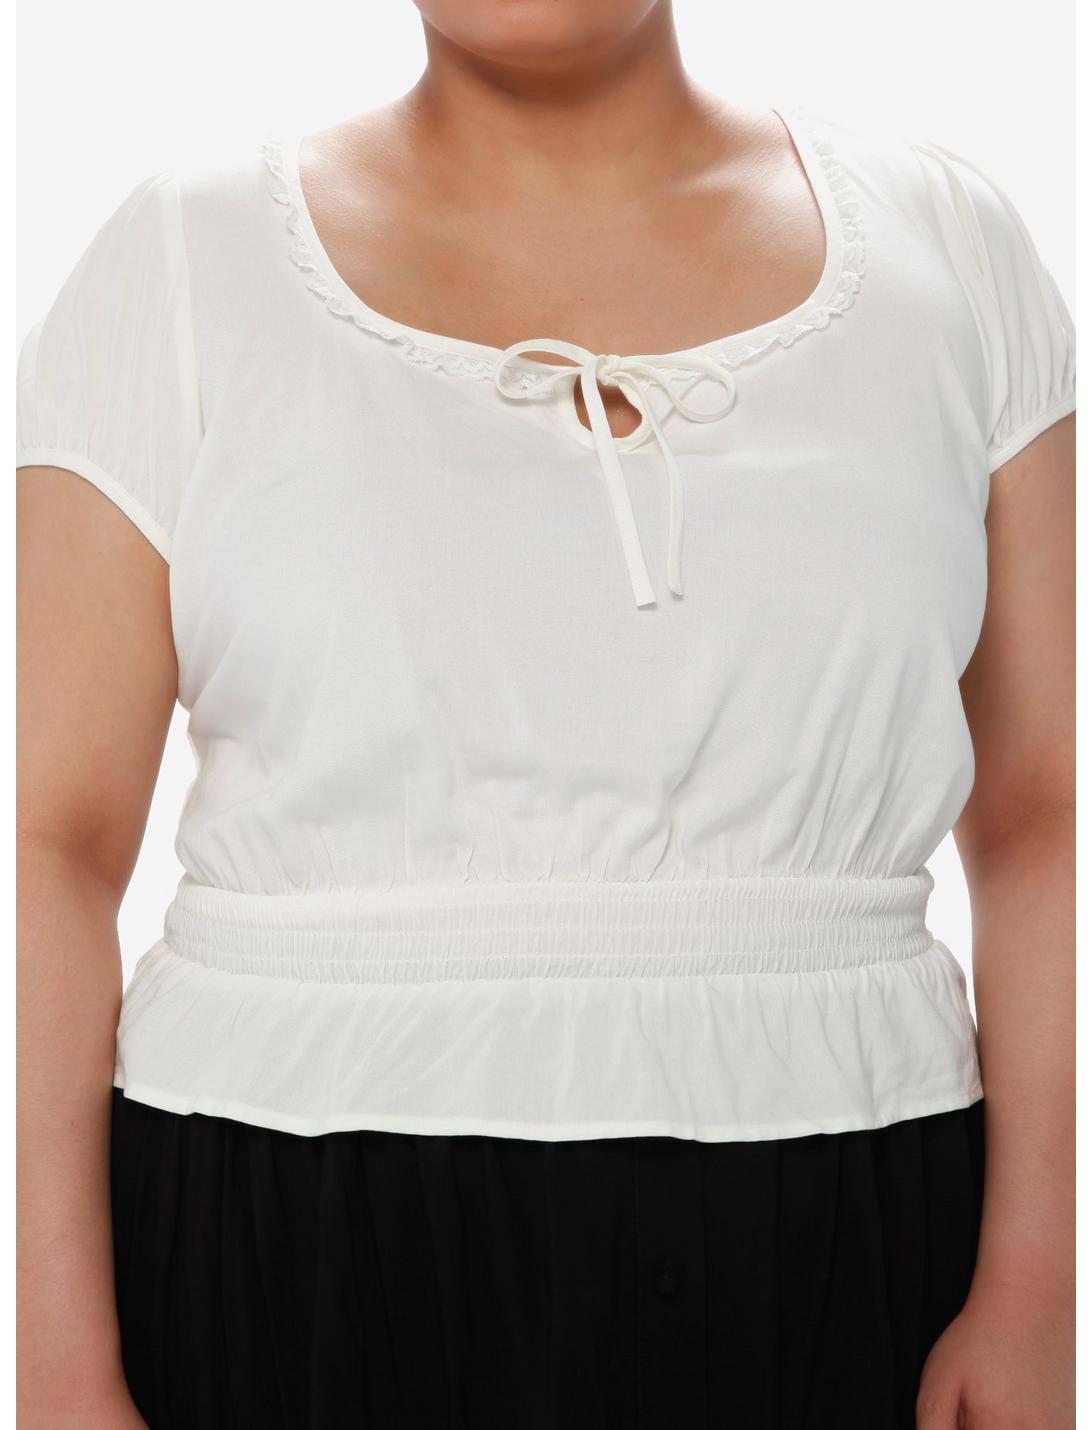 Thorn & Fable Ivory Smock Girls Crop Top Plus Size, IVORY, hi-res